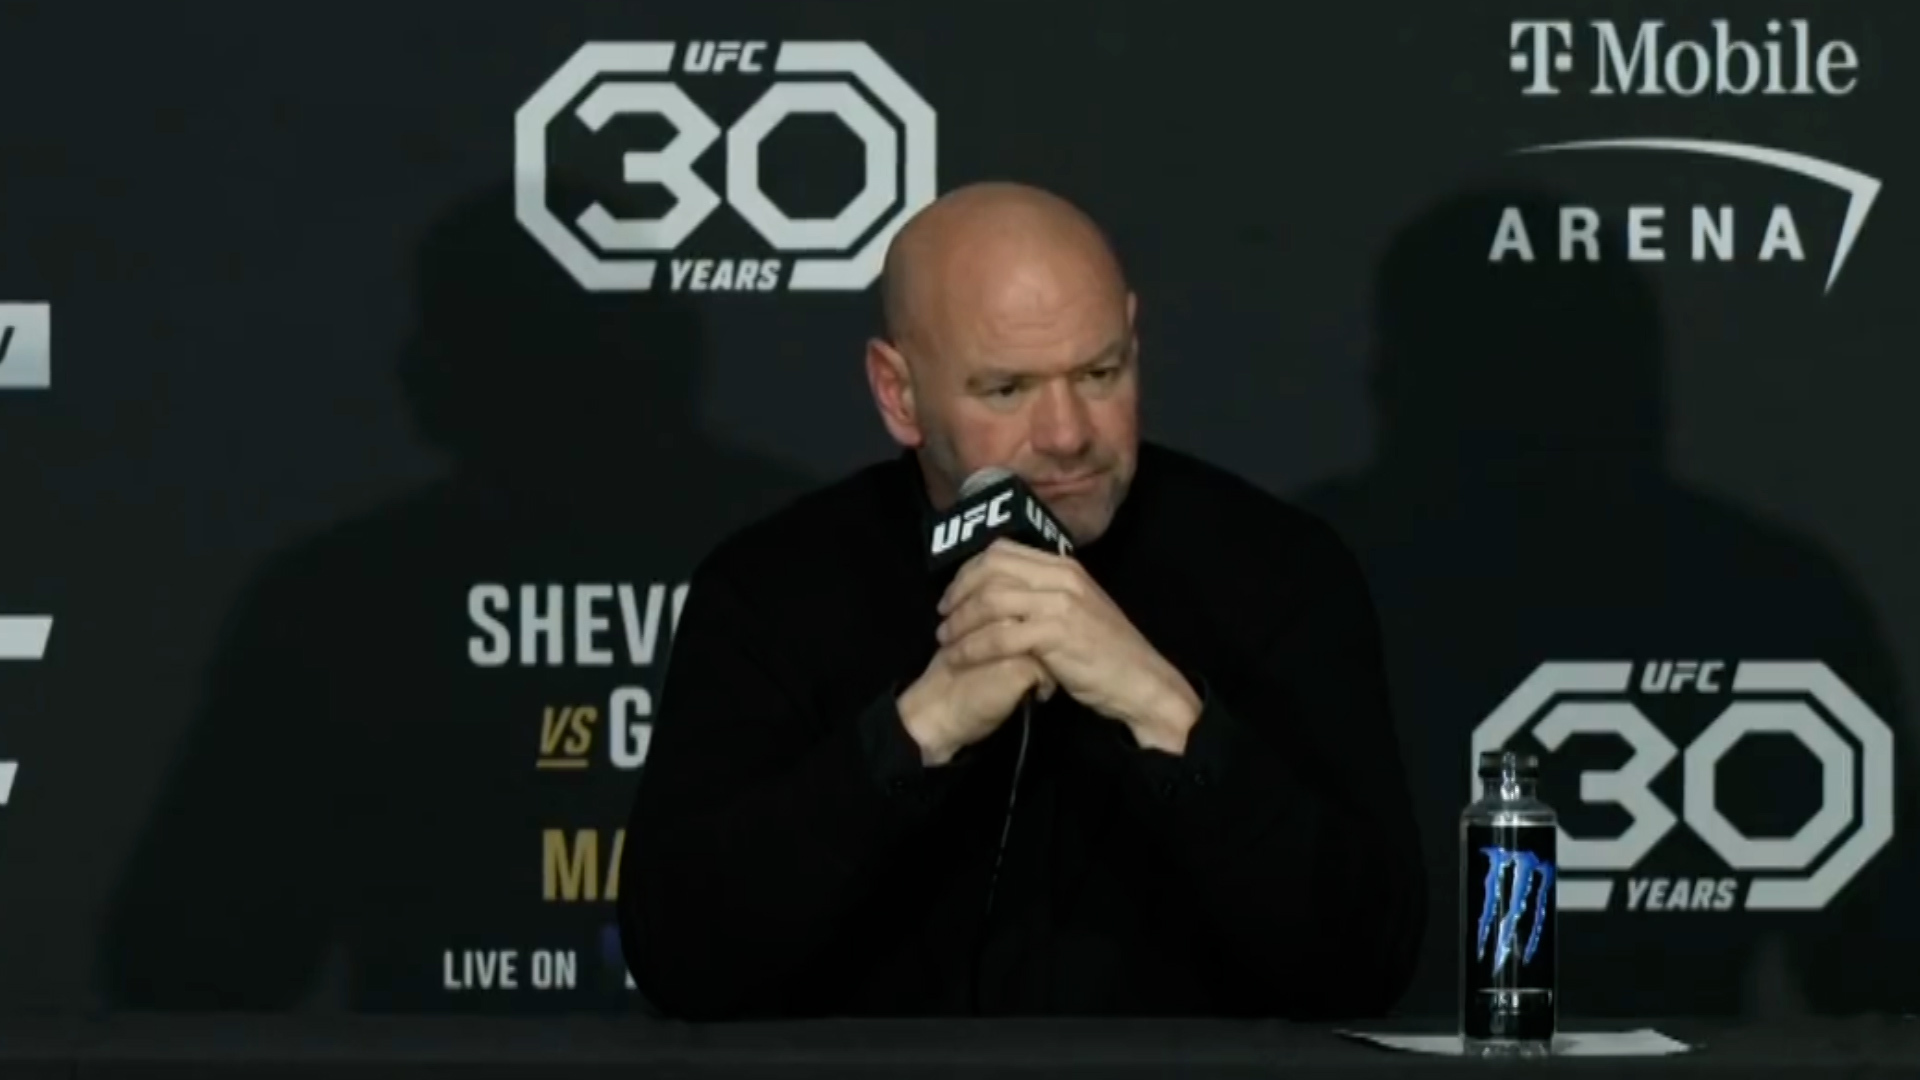 Dana White's big claim: says Jon Jones would have defeated Francis Ngannou just as he did against Ciryl Gane